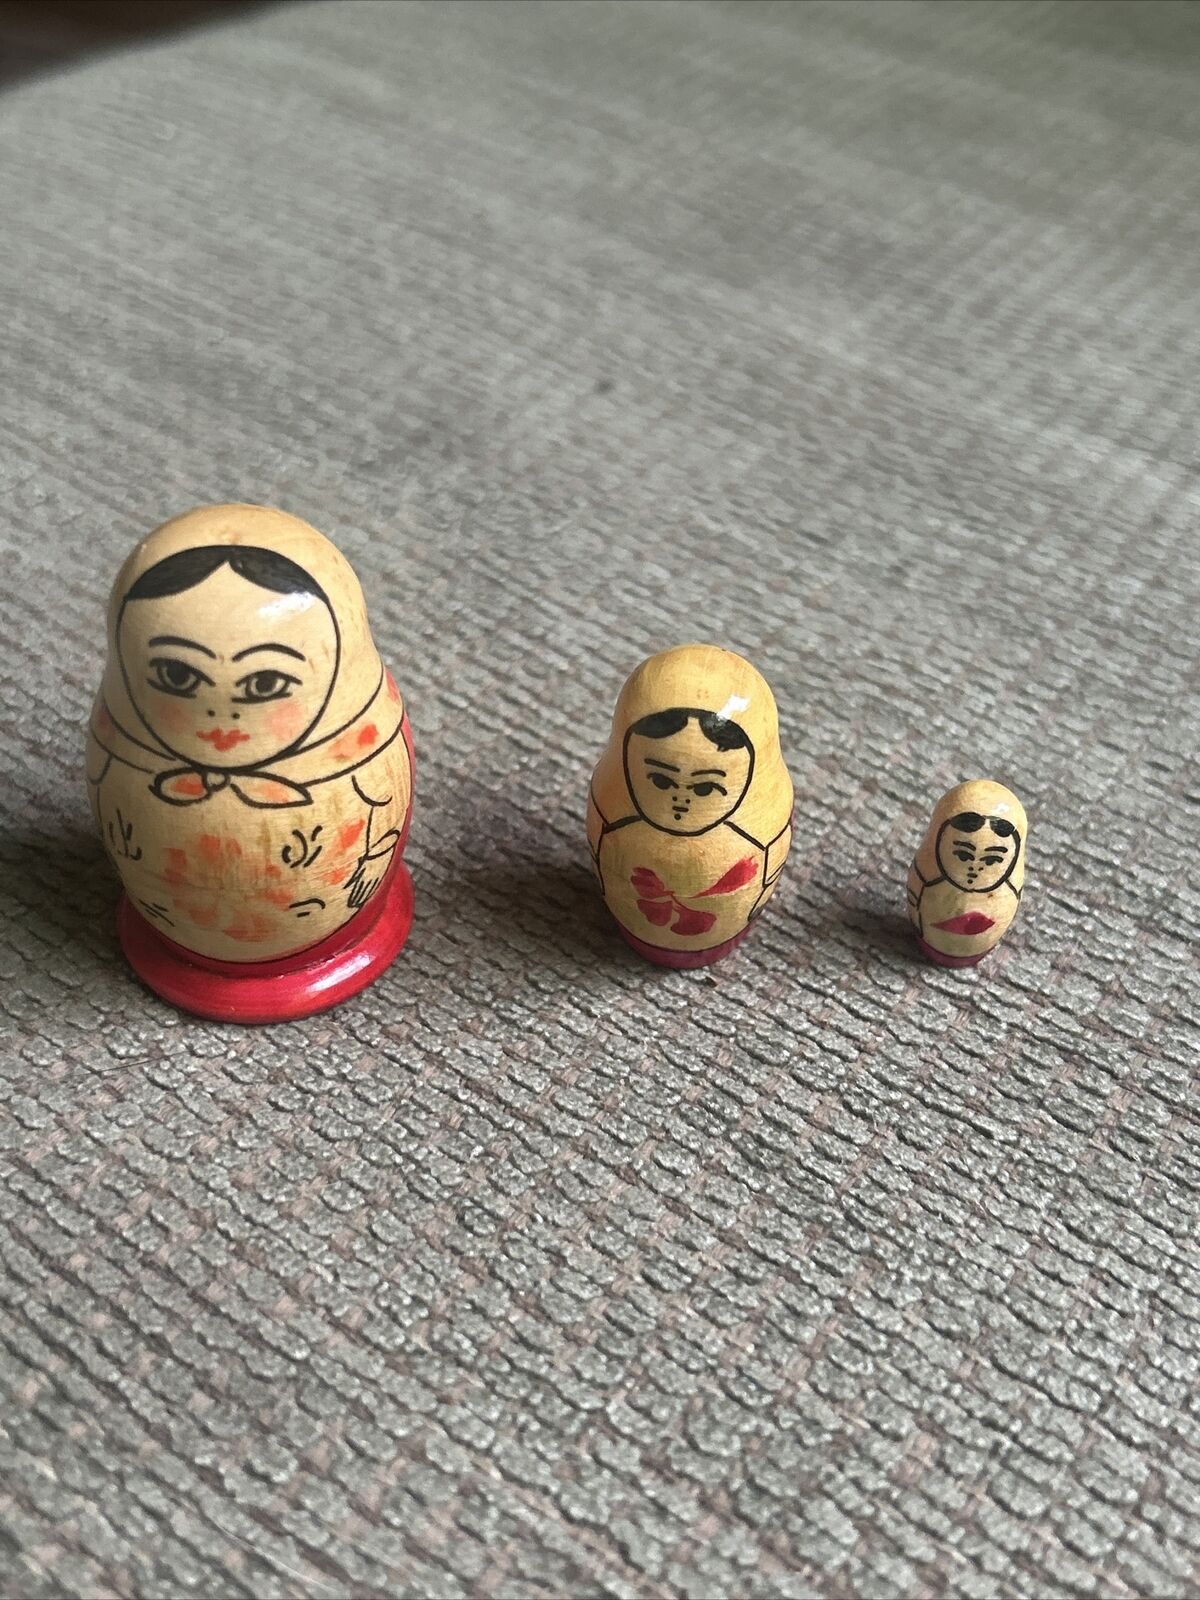 Vintage Wooden Russian Matryoshka 3 Nesting Dolls Hand Painted Made in USSR